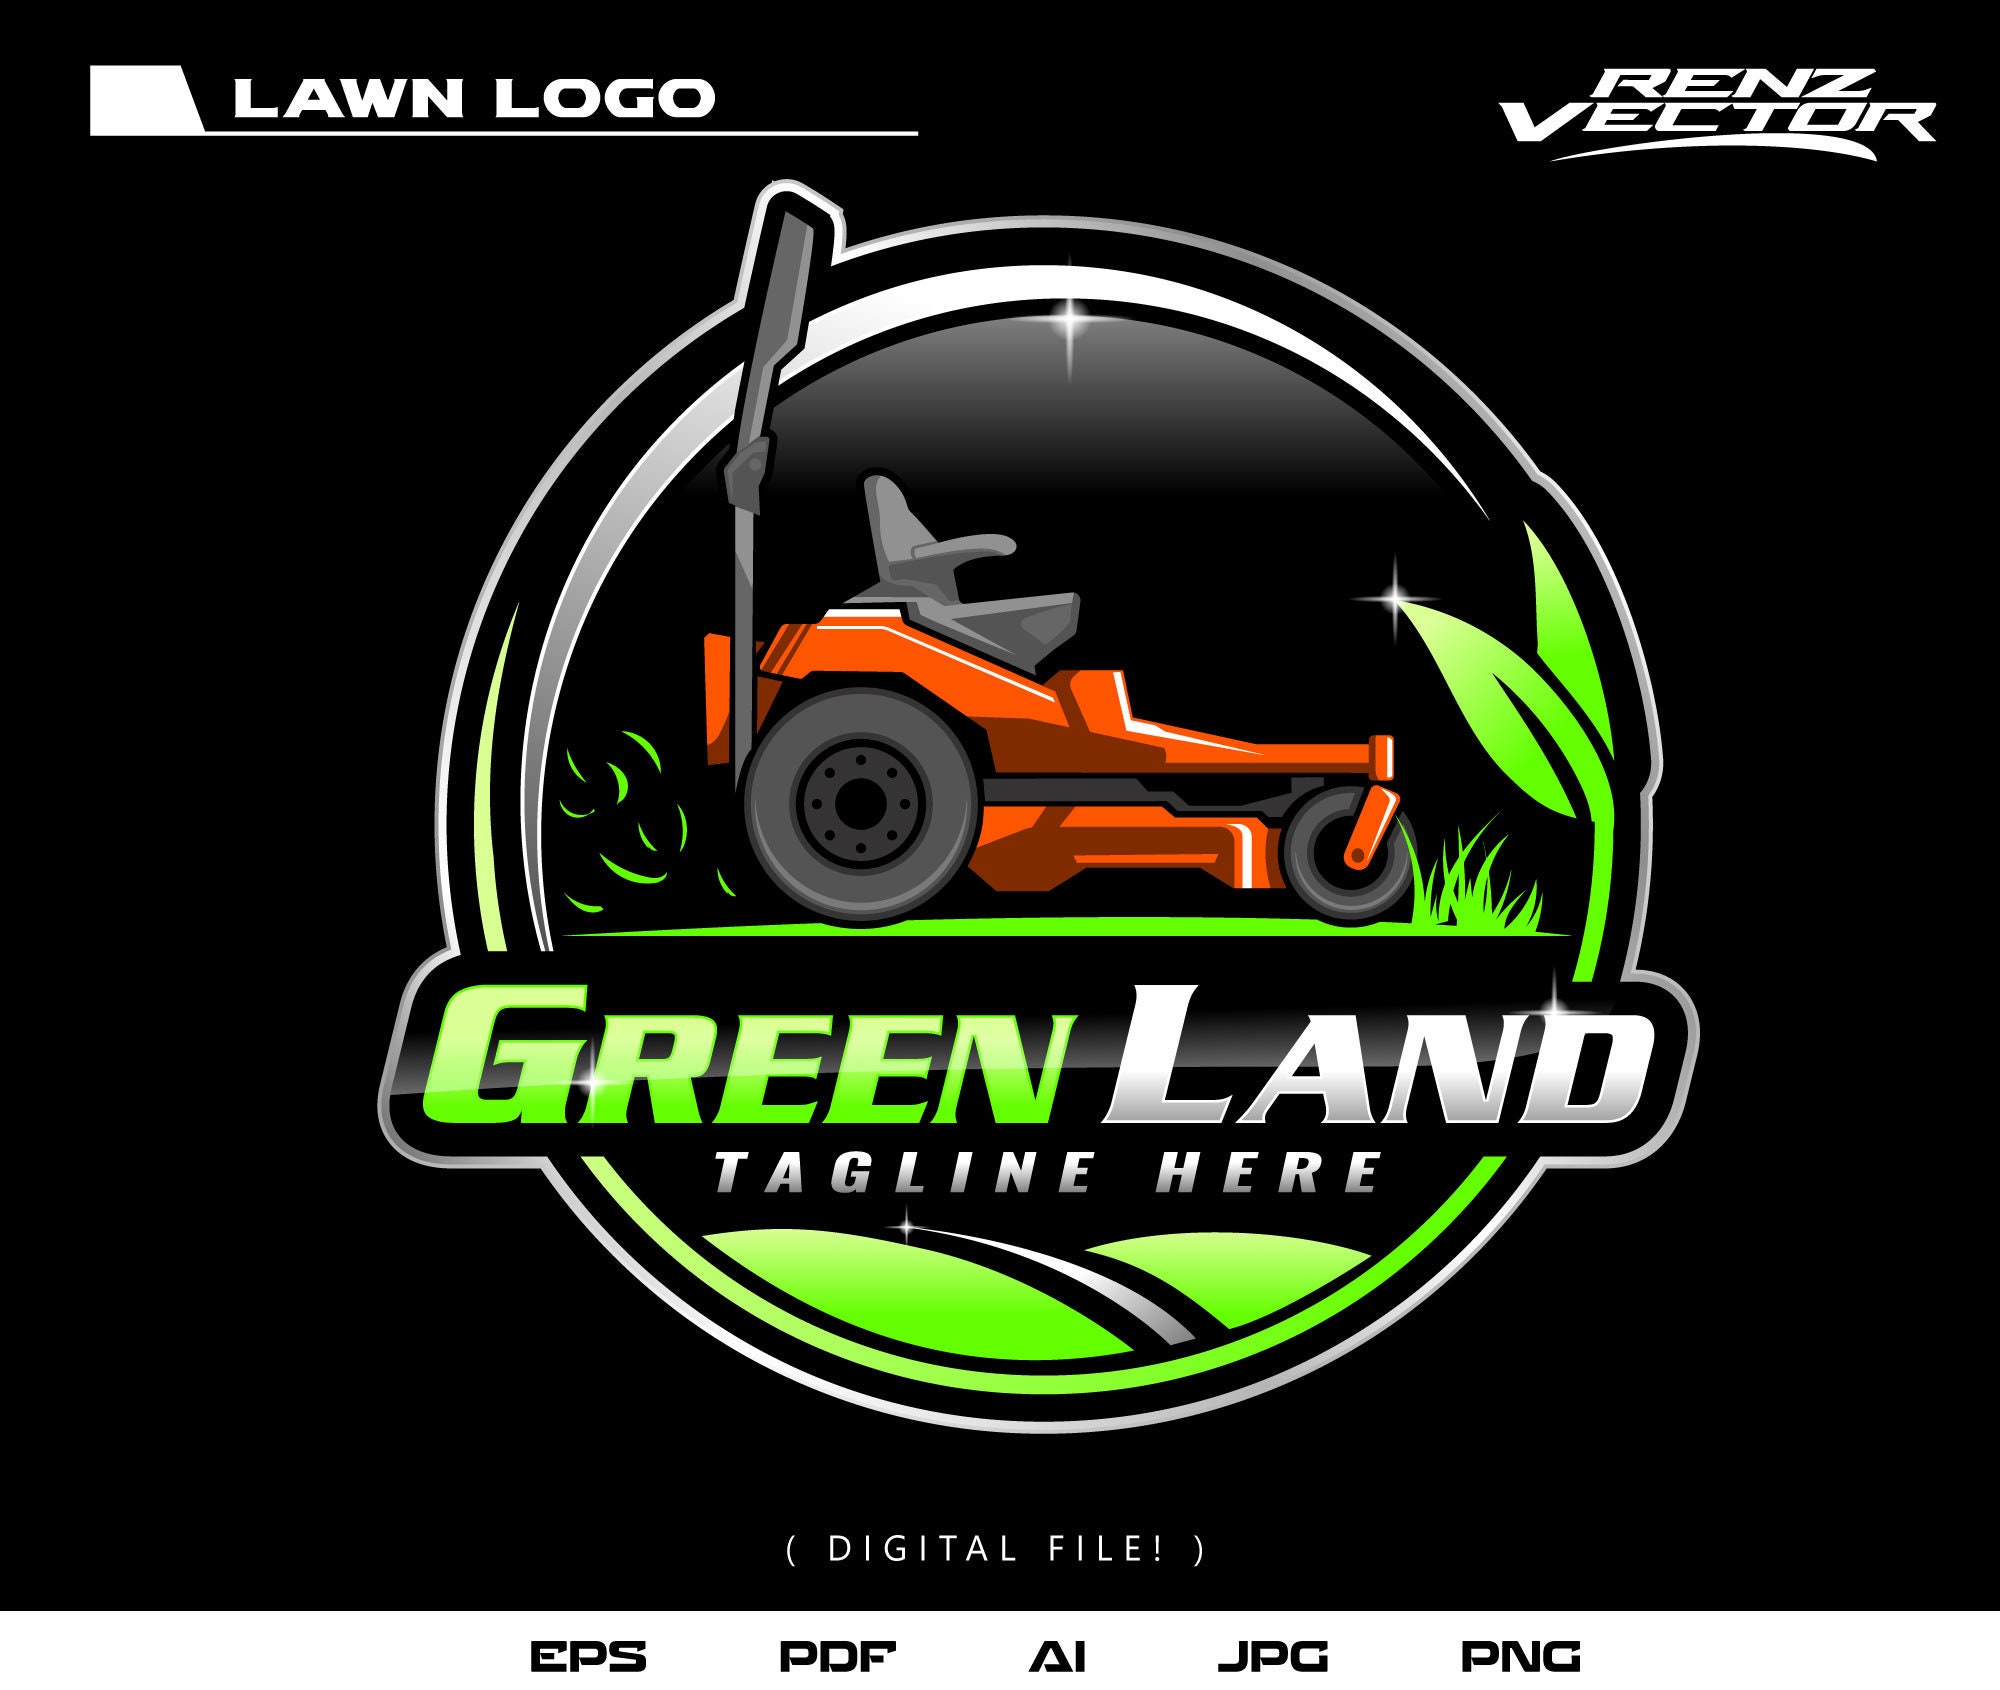 Mowing logo lawn for sale  